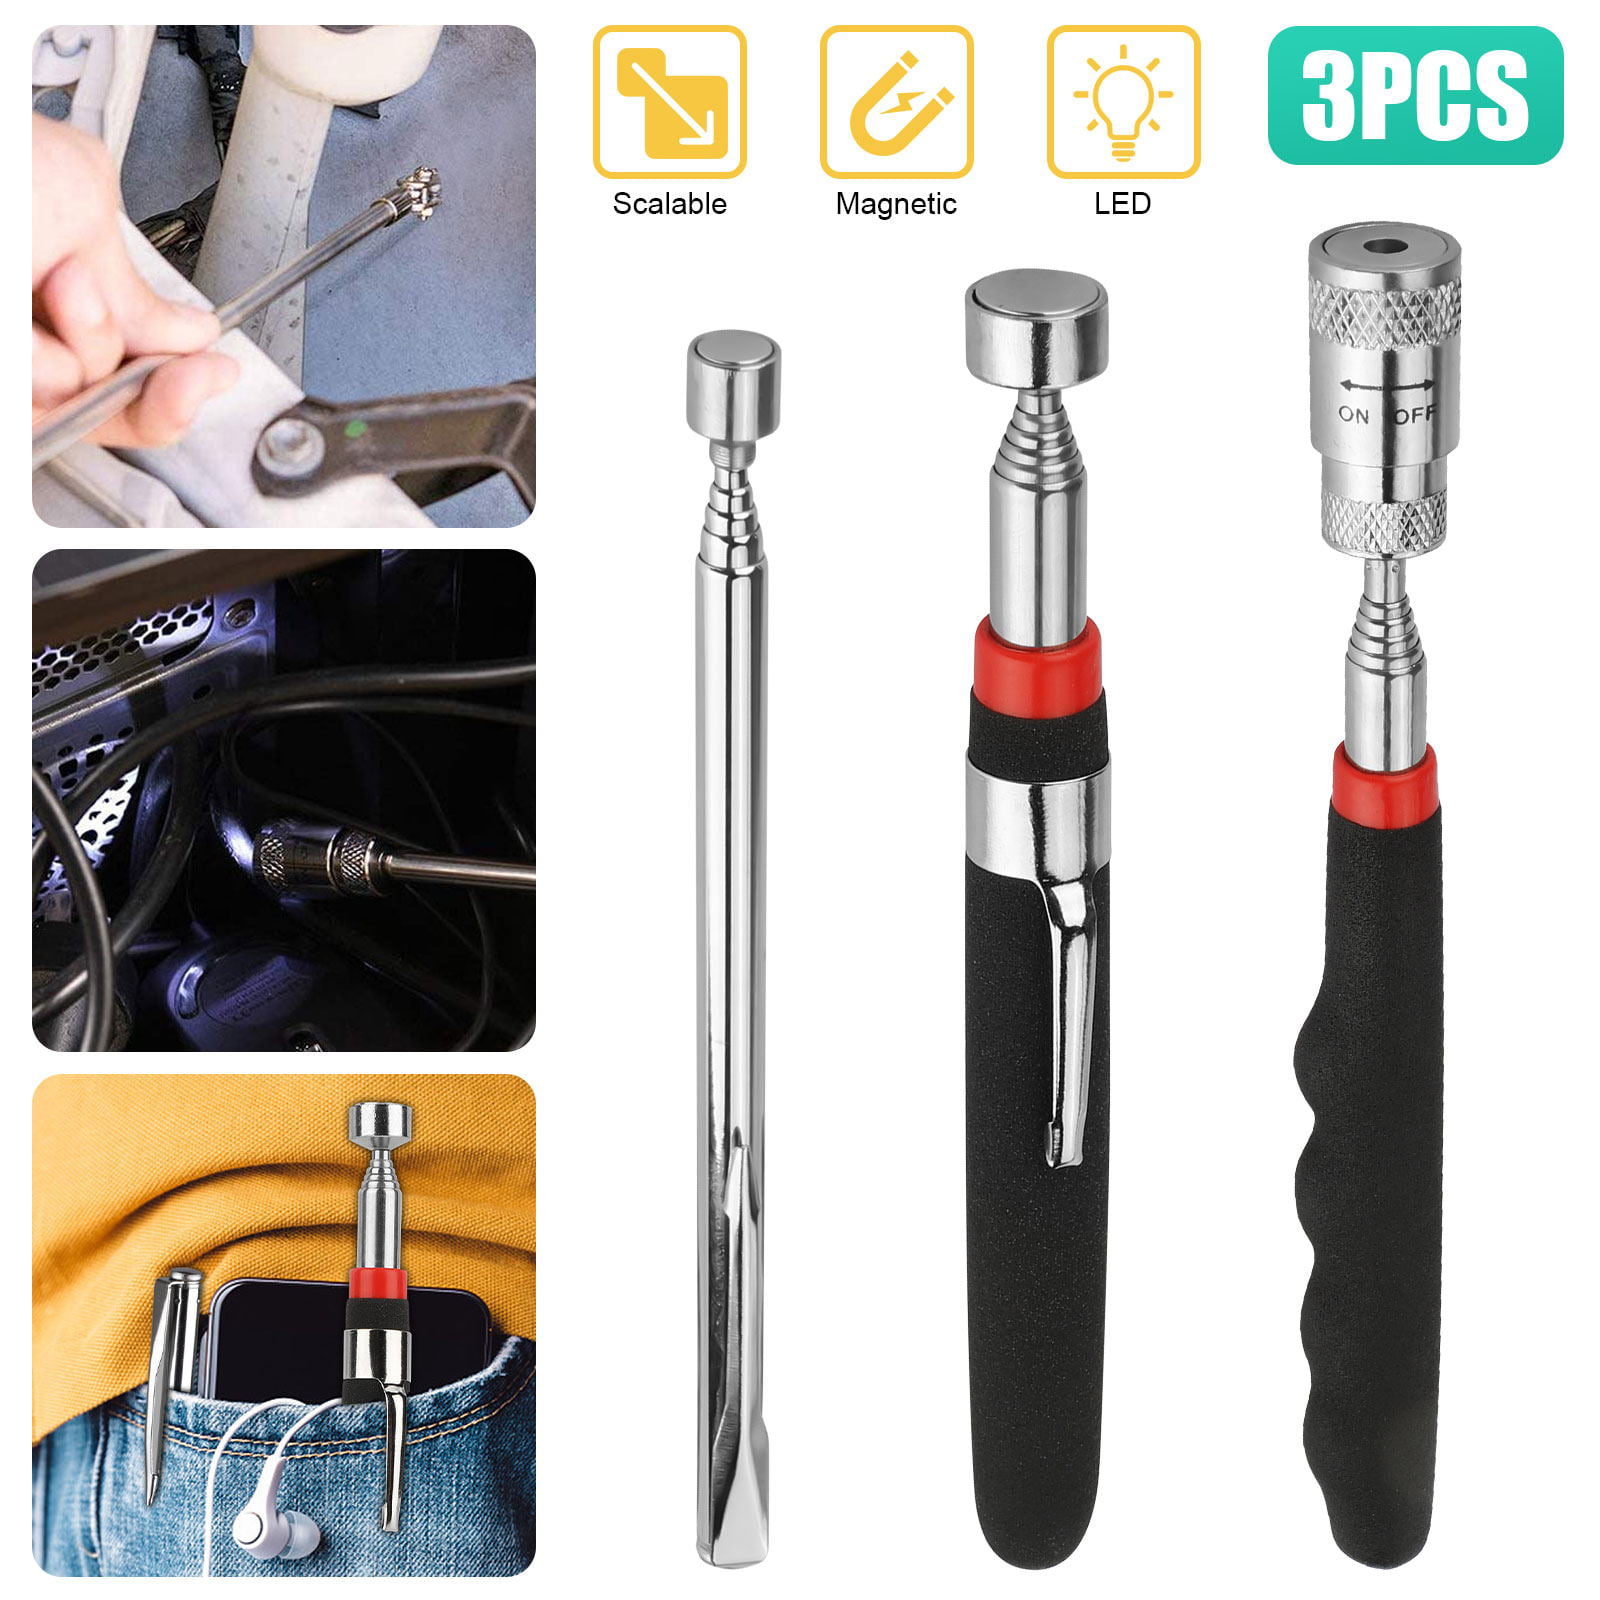 TELESCOPIC LED LIGHTED LIGHT UP FLEXIBLE MAGNETIC SMALL PARTS PICK UP TOOL STICK 